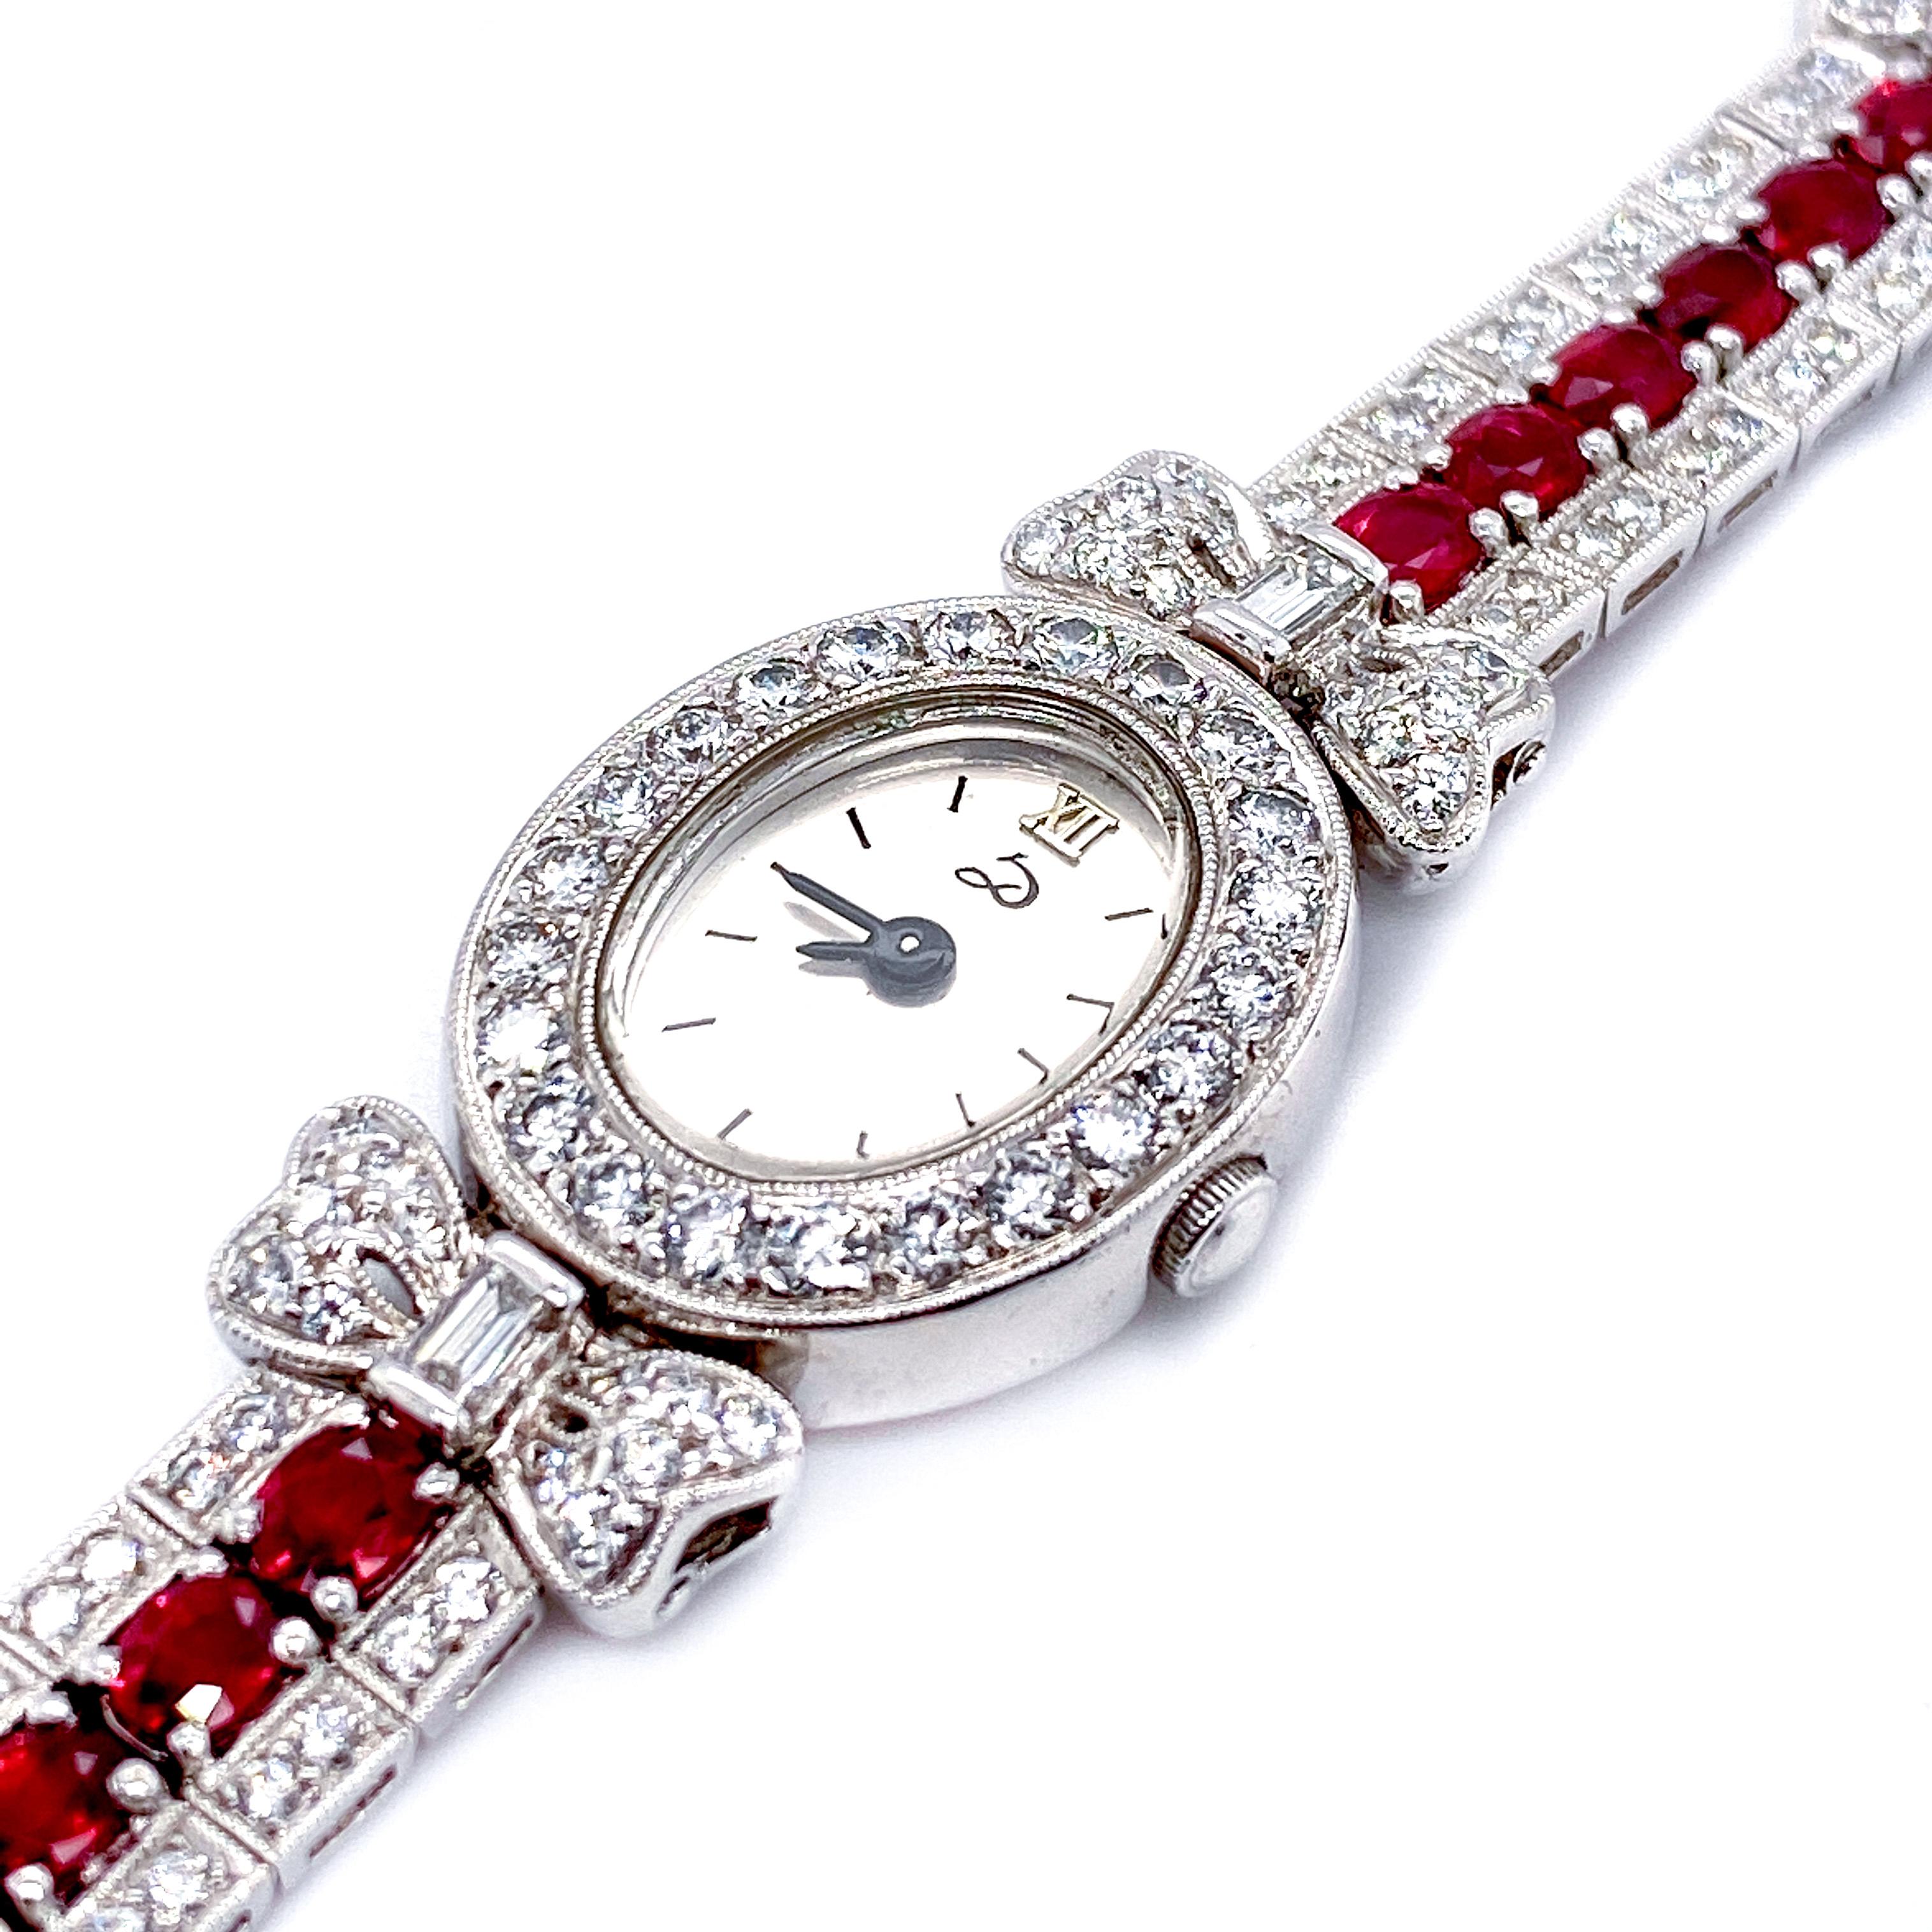 A stunning work of wearable art, this one-of-a-kind Swiss Quartz movement ruby and diamond watch in 18 karat gold by Dilys’ represents the brand’s passion for exceptional gems and elegant design. All 38 parts of the watch are movable, not